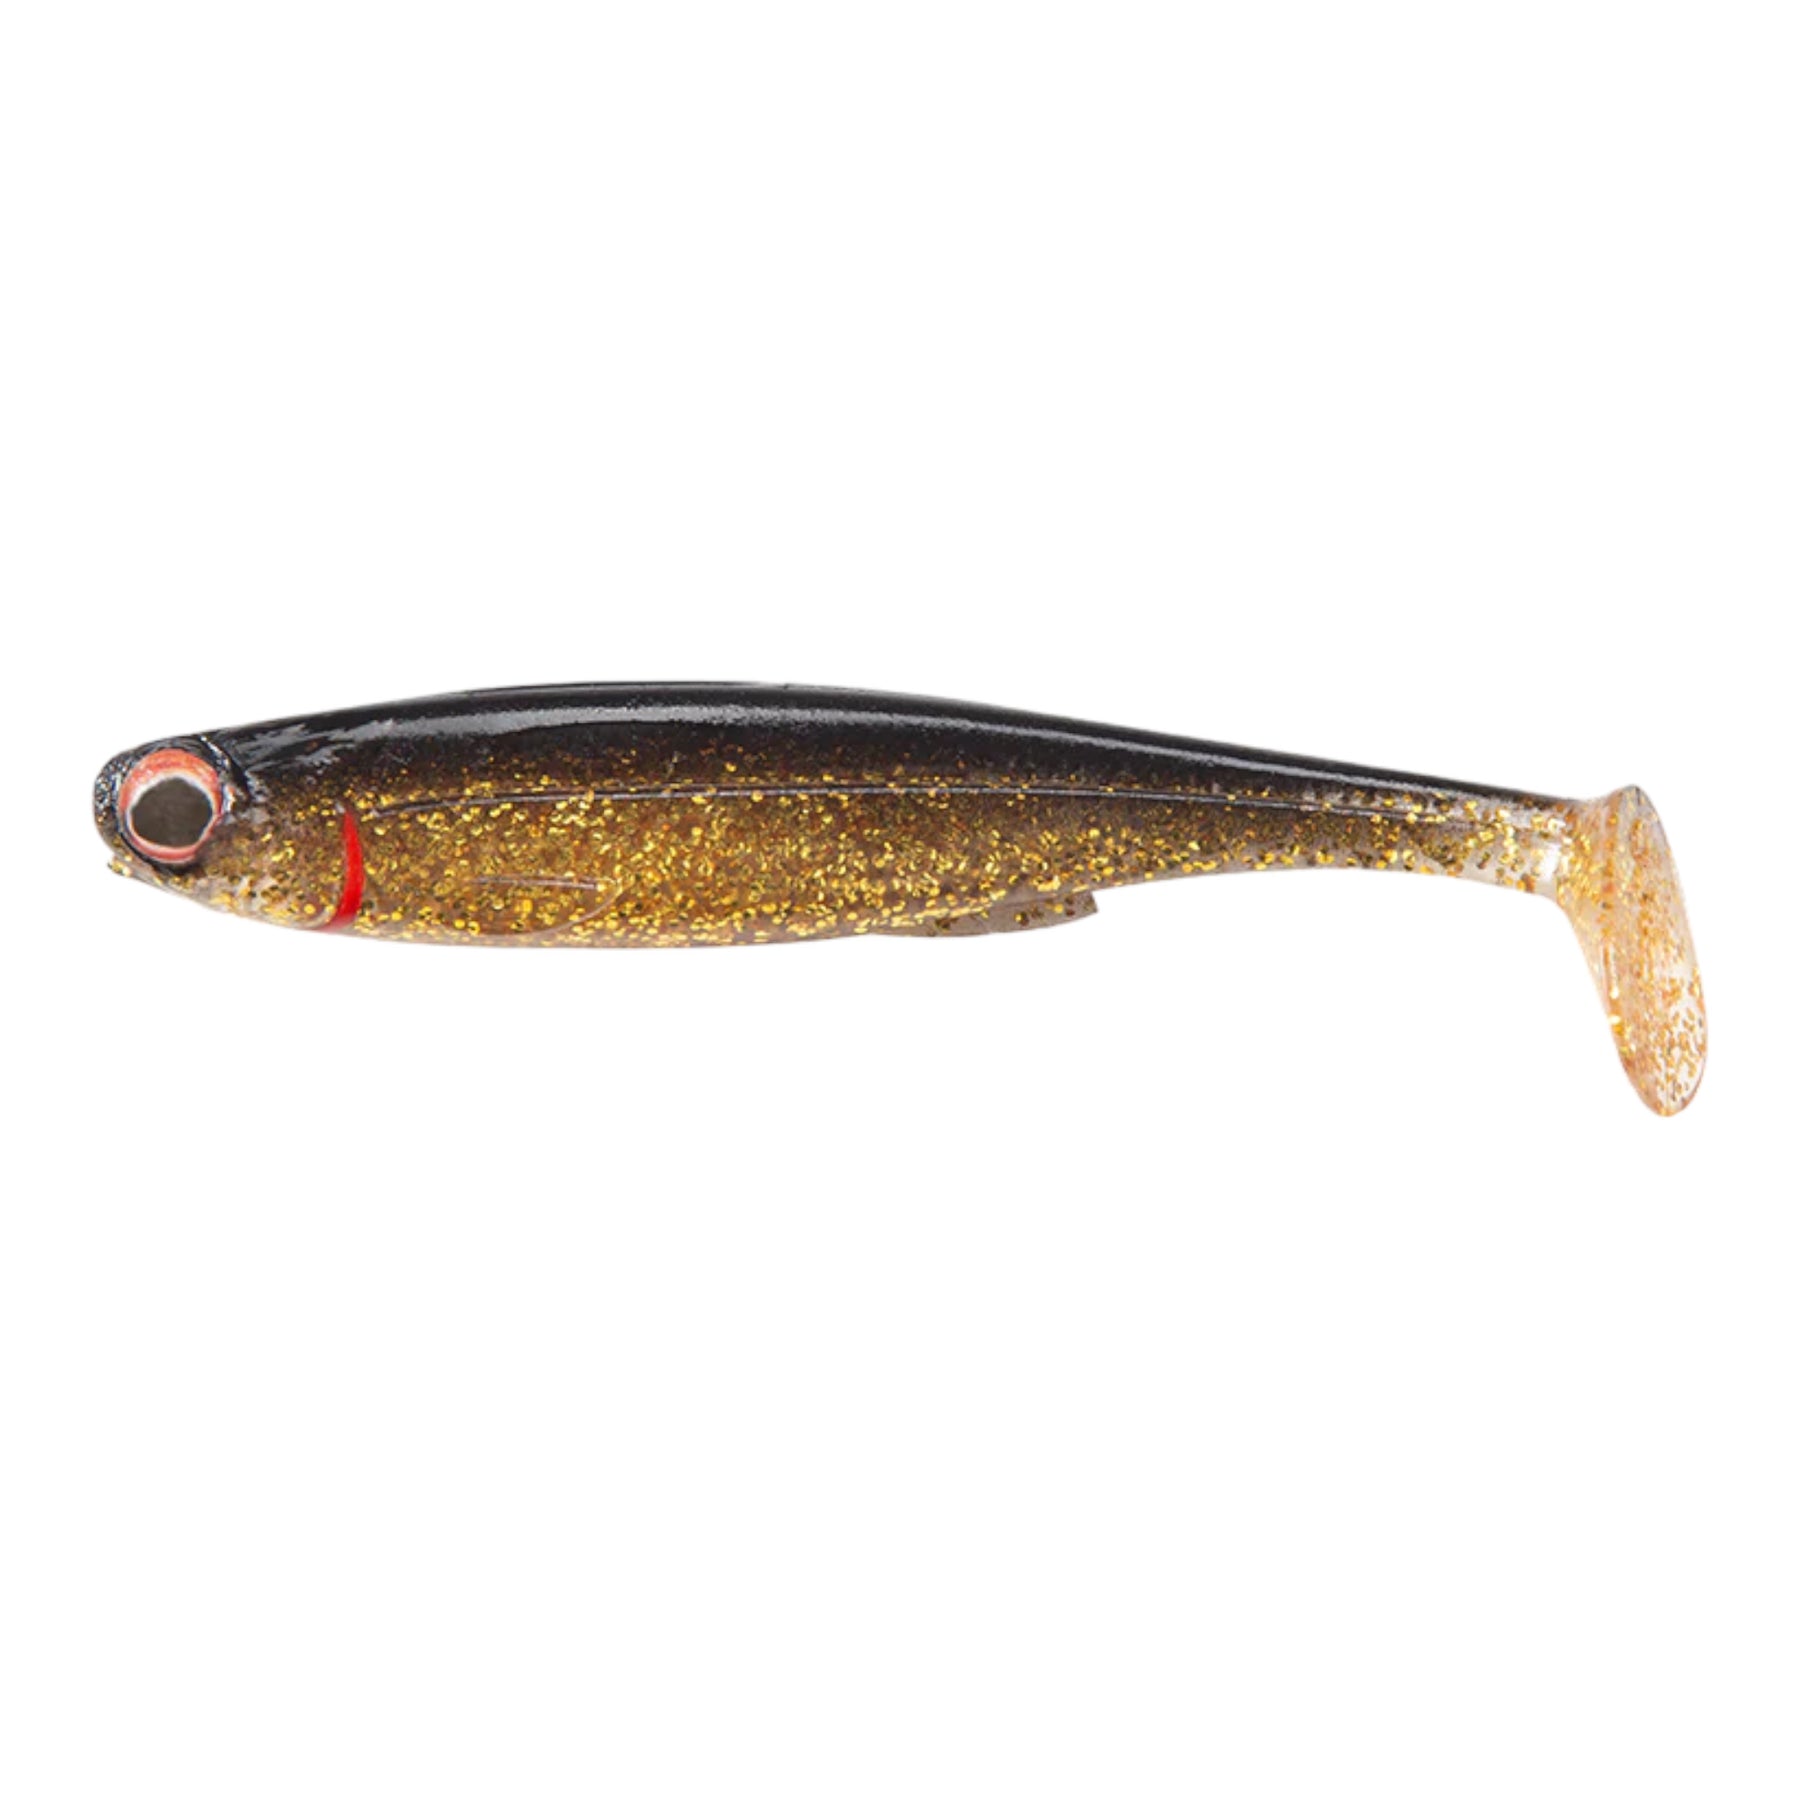 Zipbaits Rigge Raphael - Compleat Angler Nedlands Pro Tackle